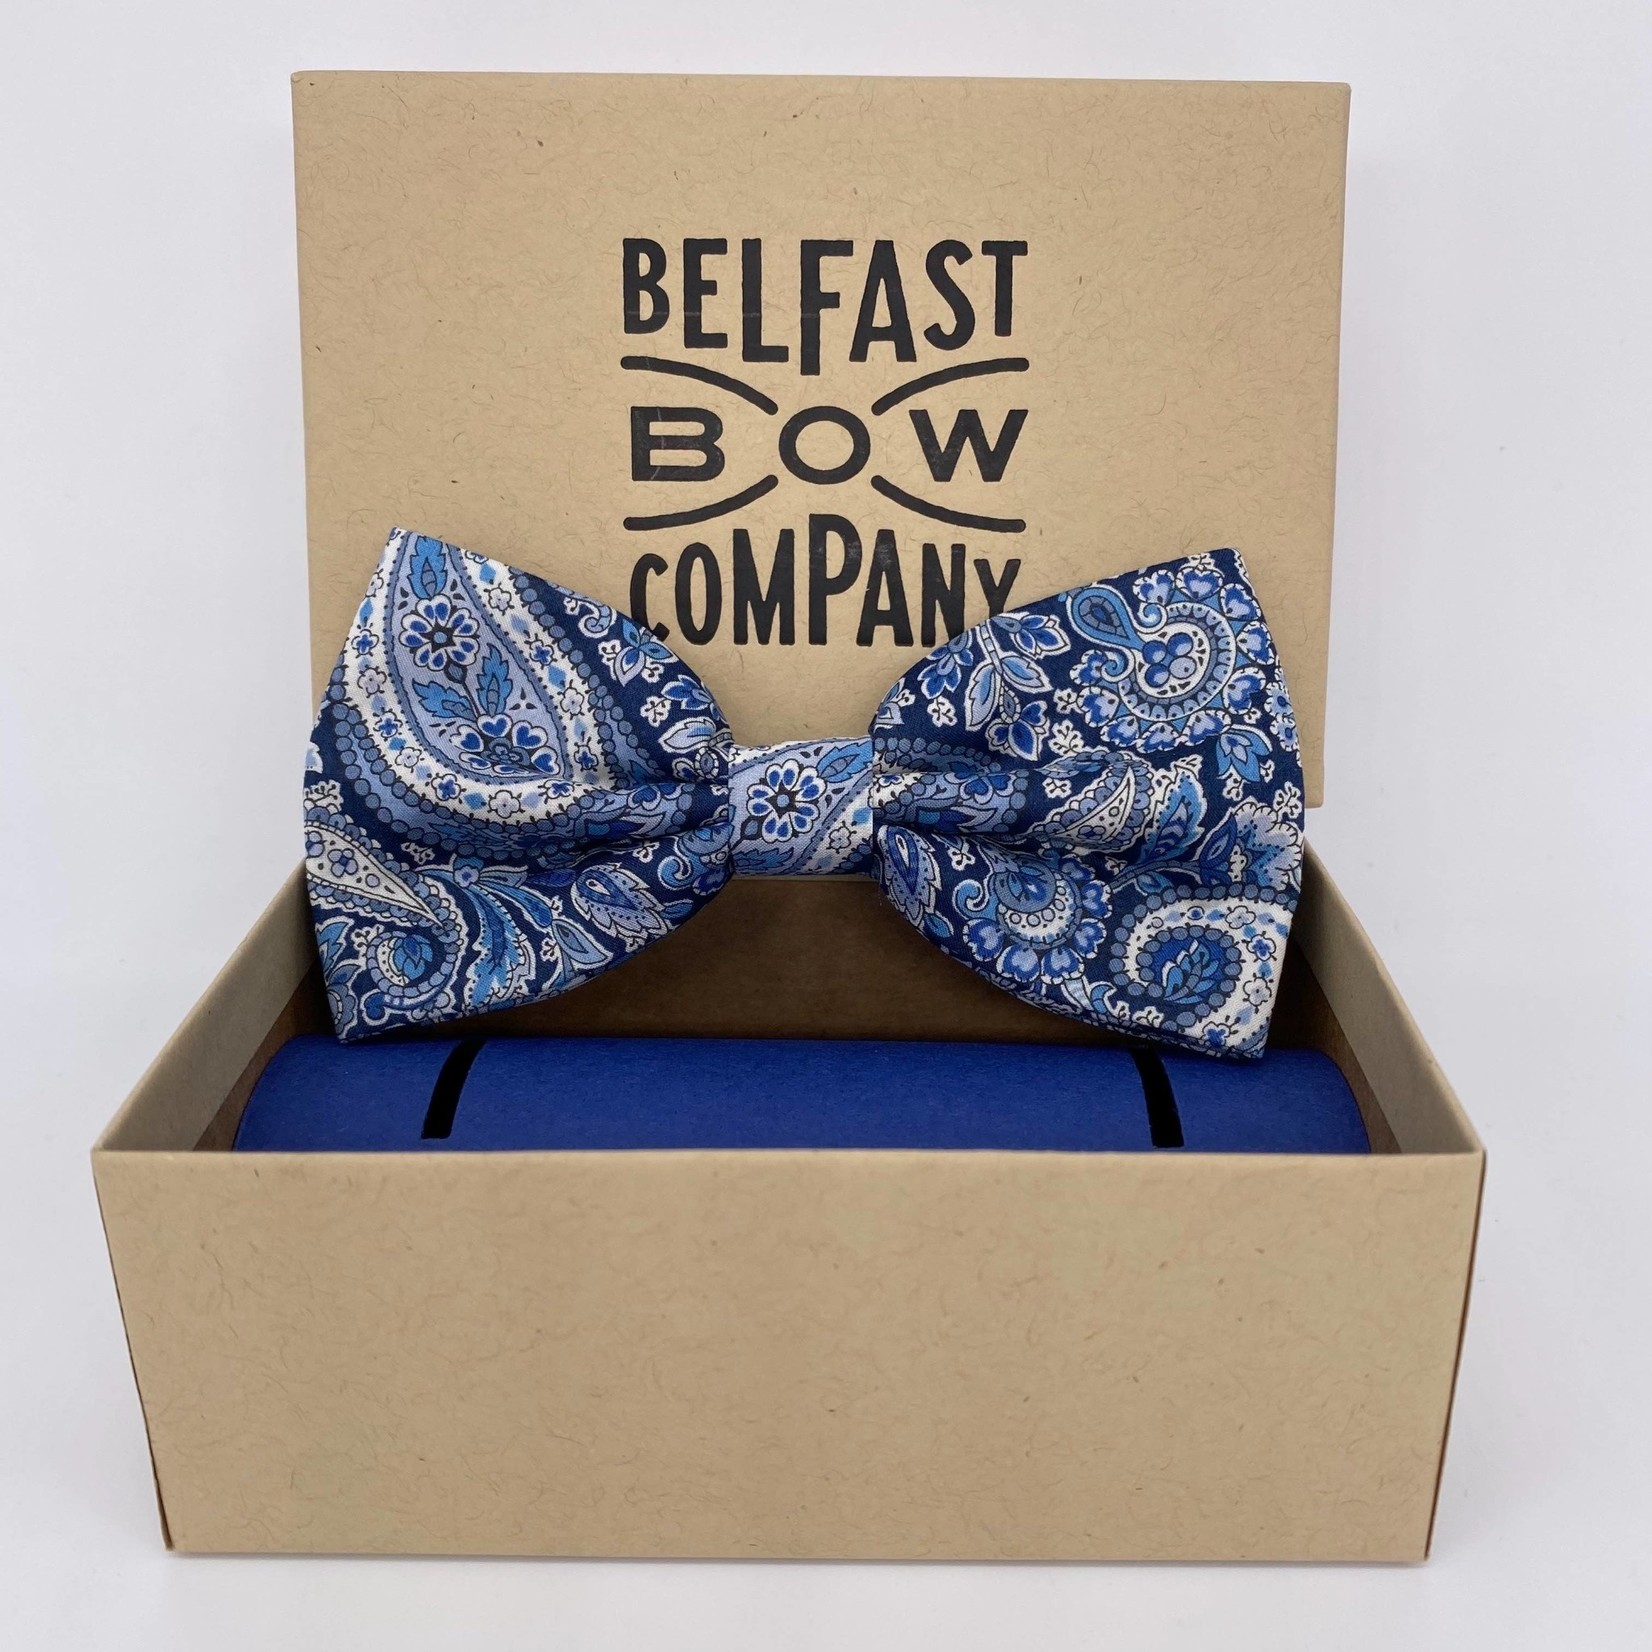 Belfast Bow Company Bow Tie in Liberty of London Navy Paisley